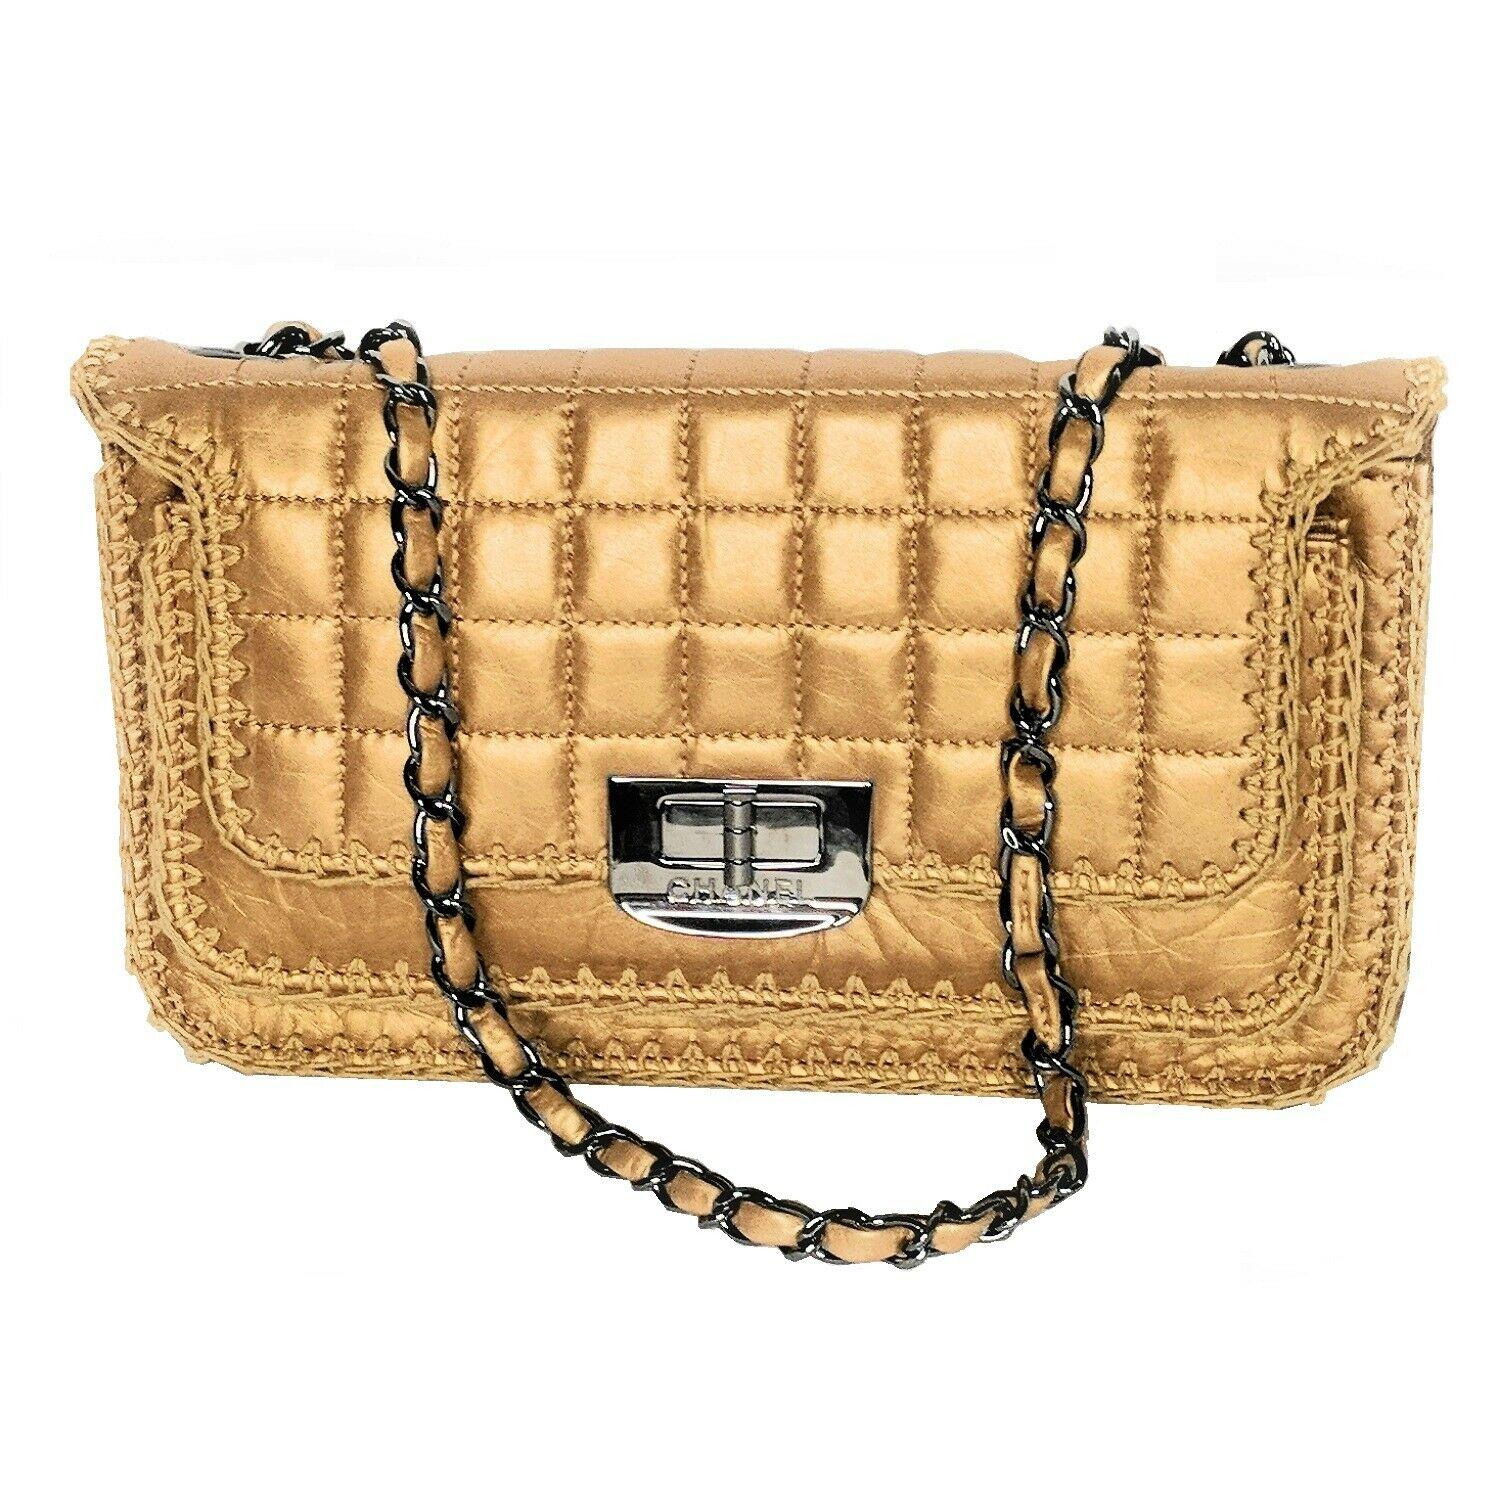 Chanel Small Gold Reissue Classic Small Medium Flap Bag In Good Condition For Sale In Miami, FL